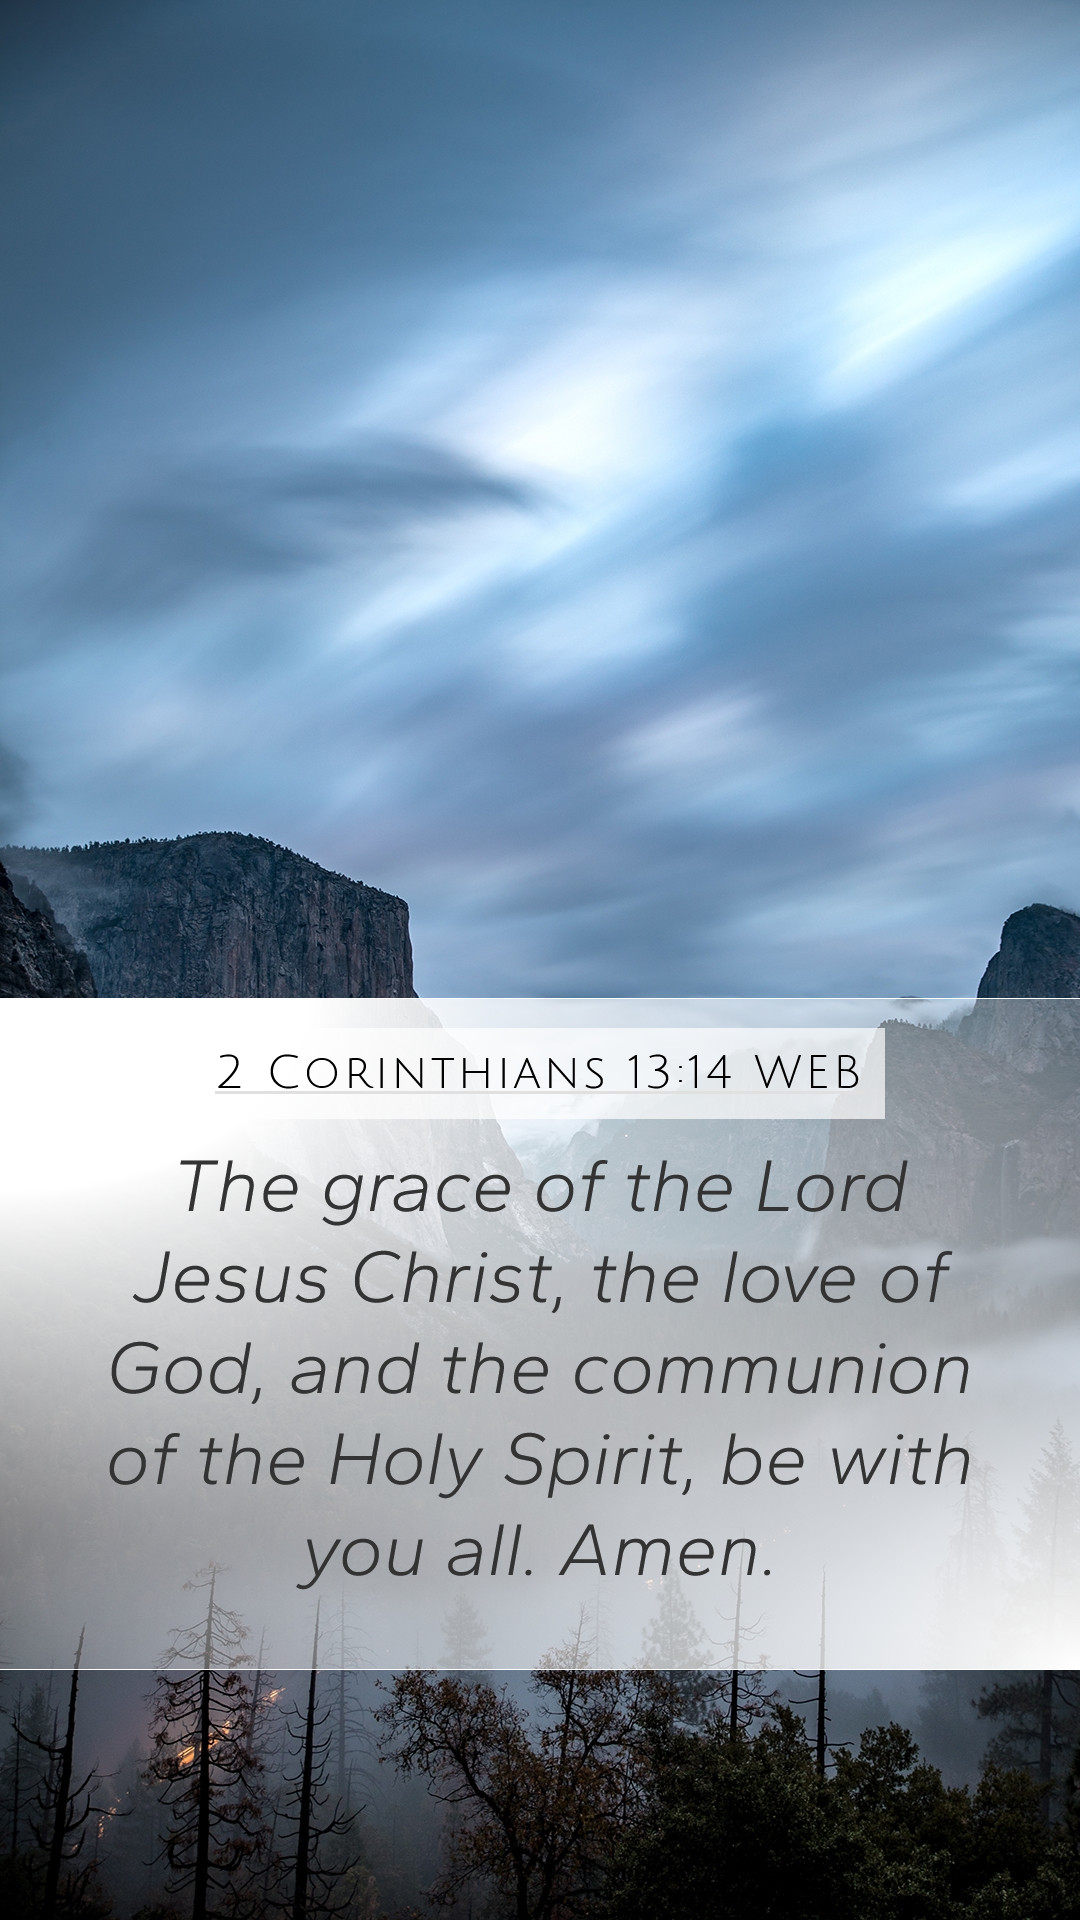 Corinthians 13:14 WEB Mobile Phone Wallpaper grace of the Lord Jesus Christ, the love of